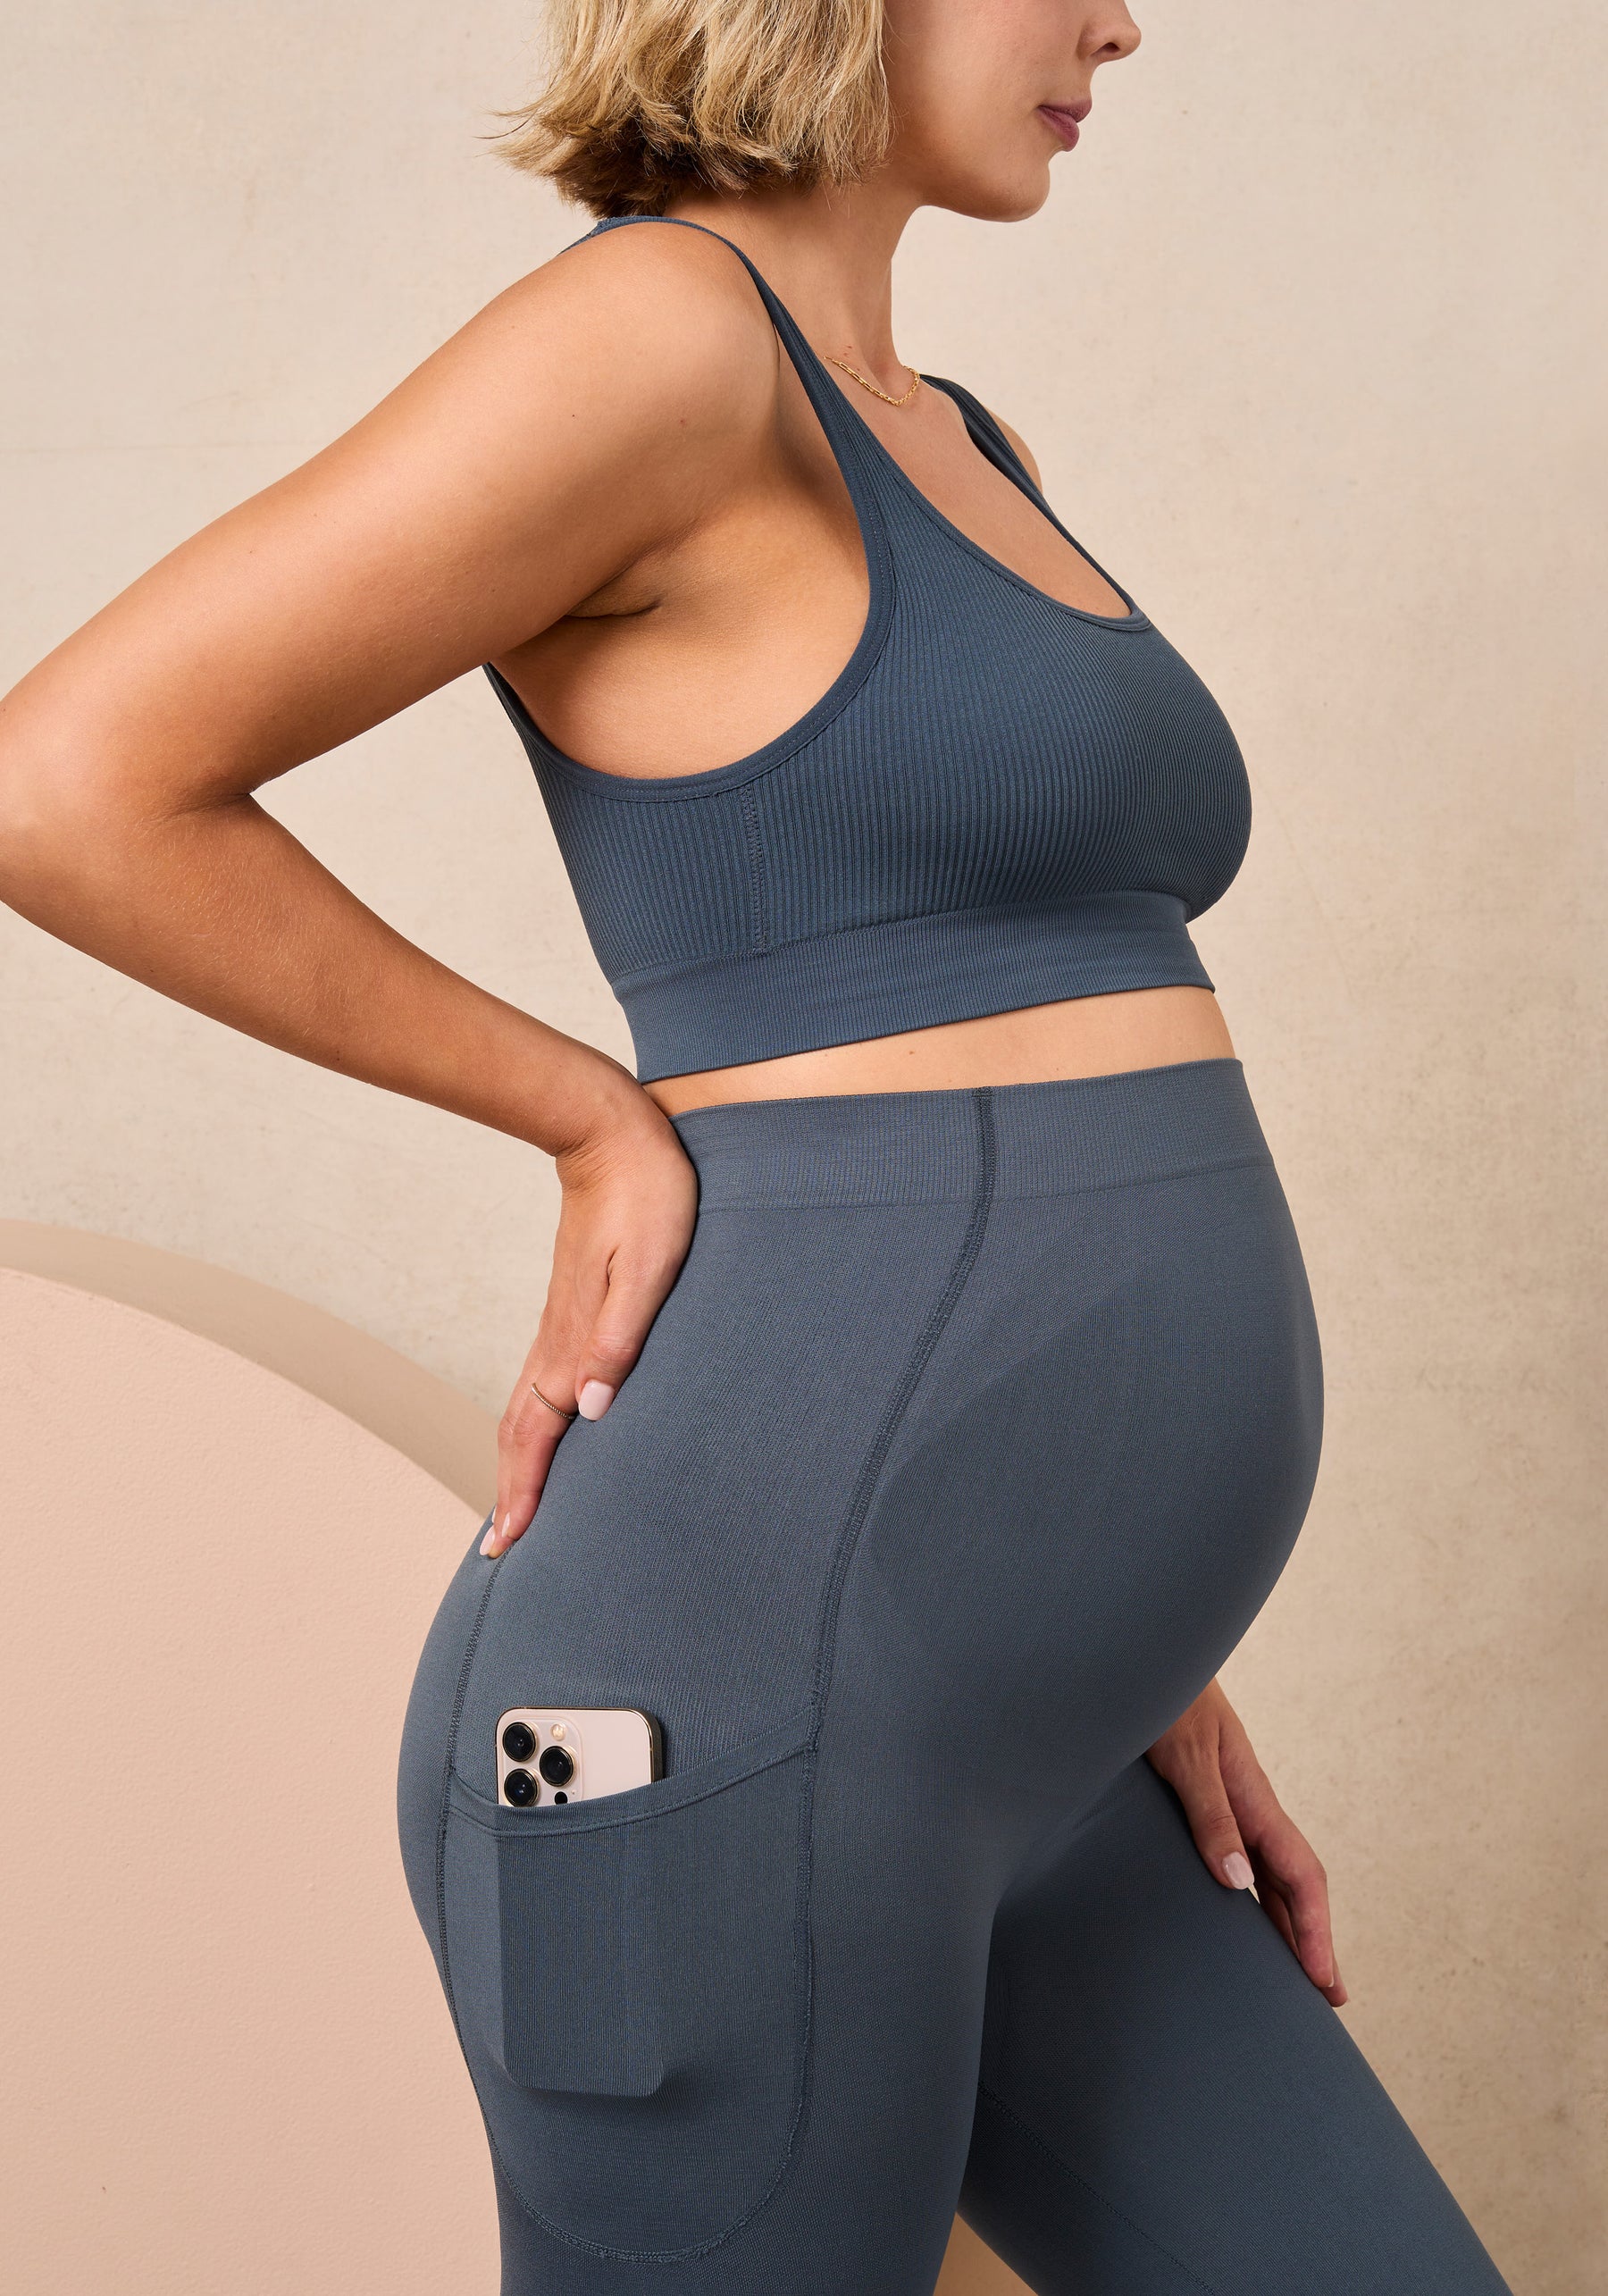 High waist clothes for pregnant large size Pregnancy Yoga Sport